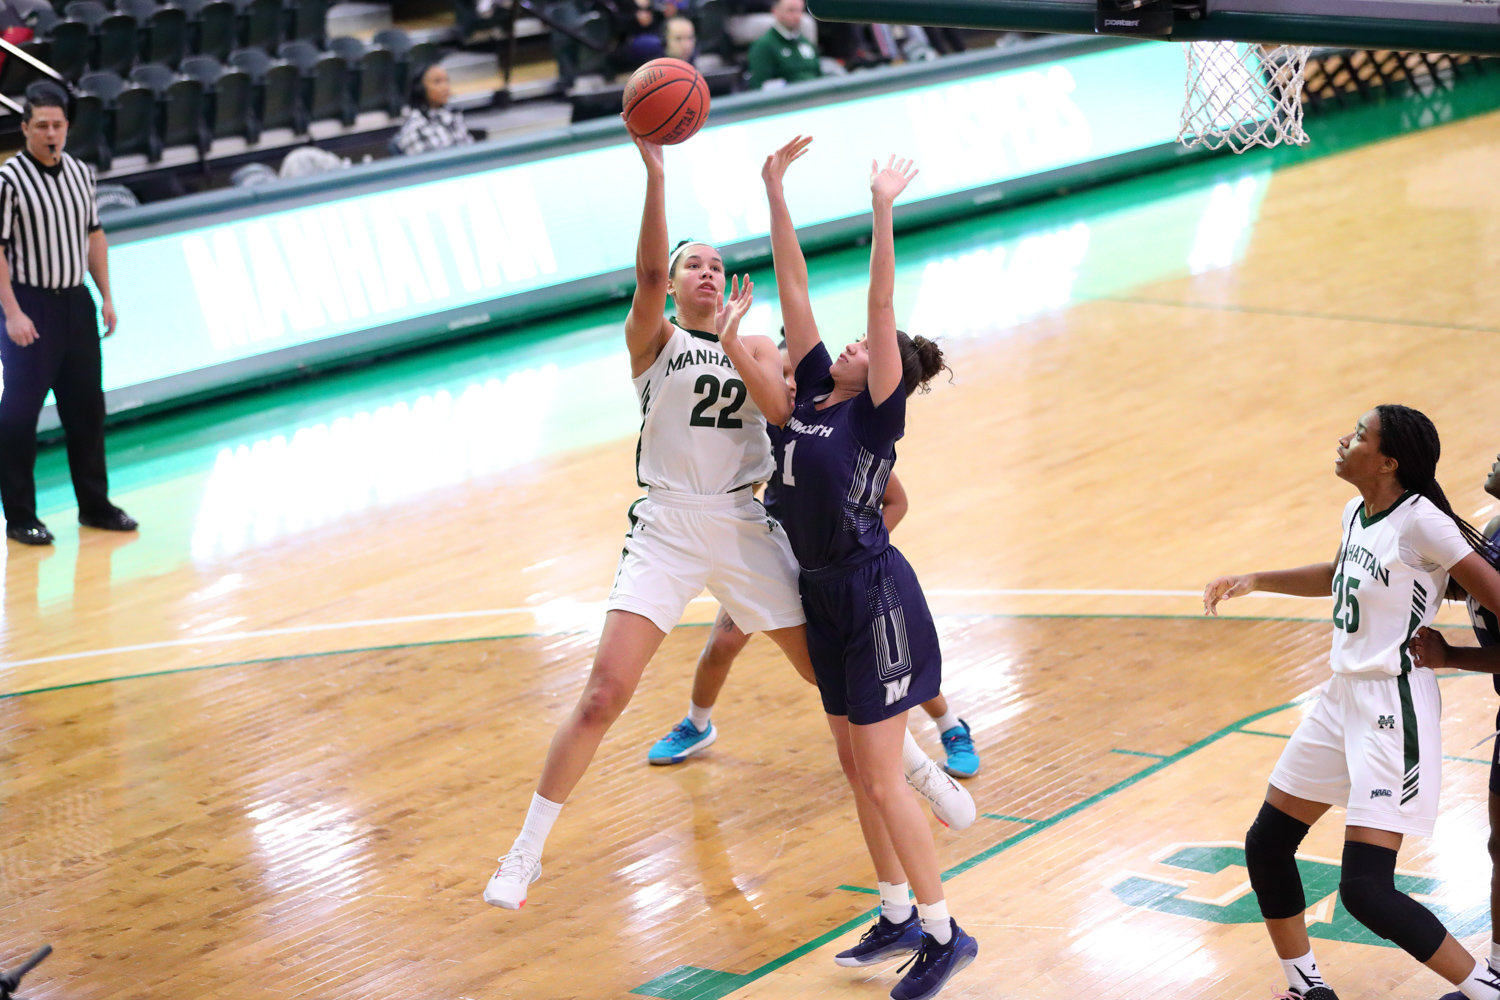 Manhattan junior Courtney Warley was second on the team in scoring (11.6 points a game) and tops in rebounding (8.8 boards per outing) for the Jaspers this season. But she was unable to add to her impressive stats last week when the MAAC tournament was shuttered due to the coronavirus pandemic.